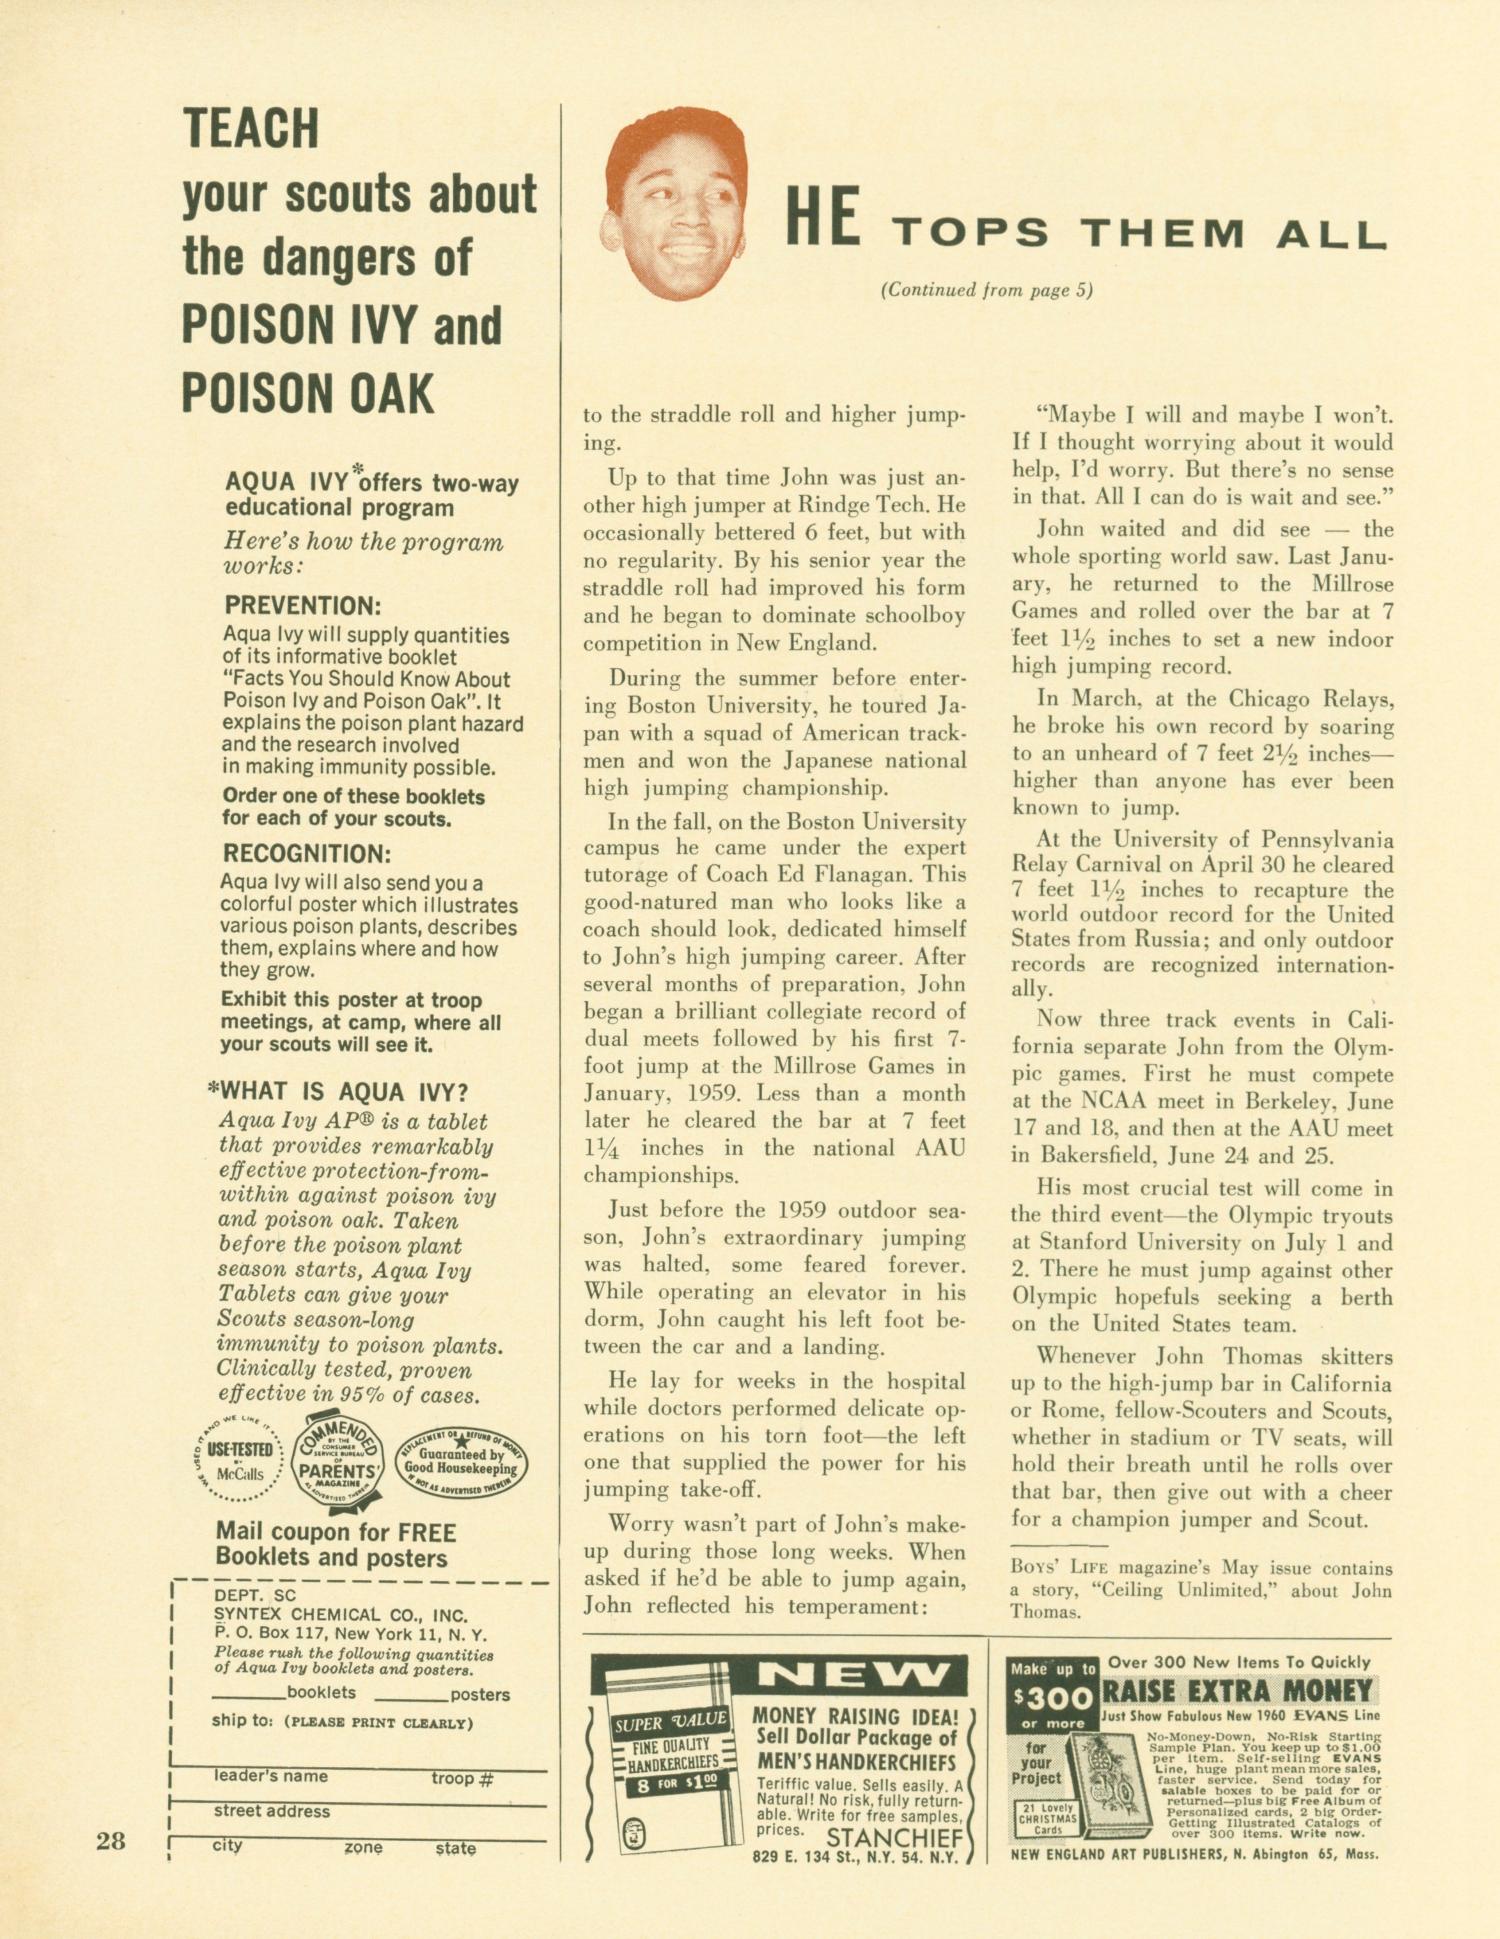 Scouting, Volume 48, Number 5, June-July 1960
                                                
                                                    28
                                                